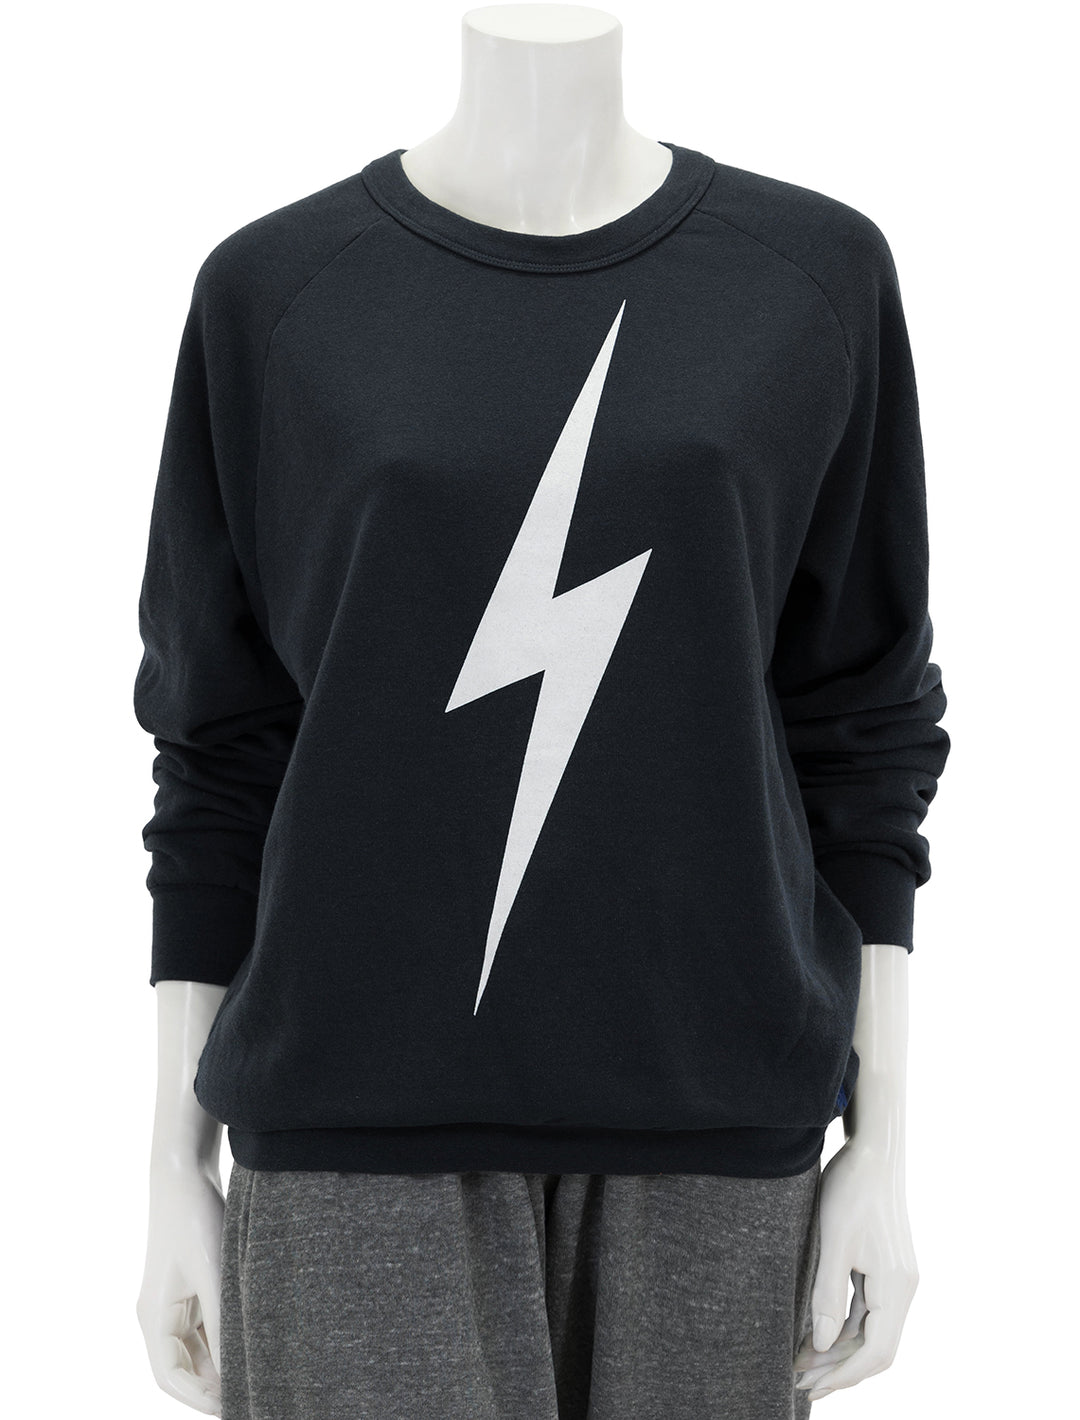 Front view of Aviator Nation's bolt sweatshirt in charcoal.